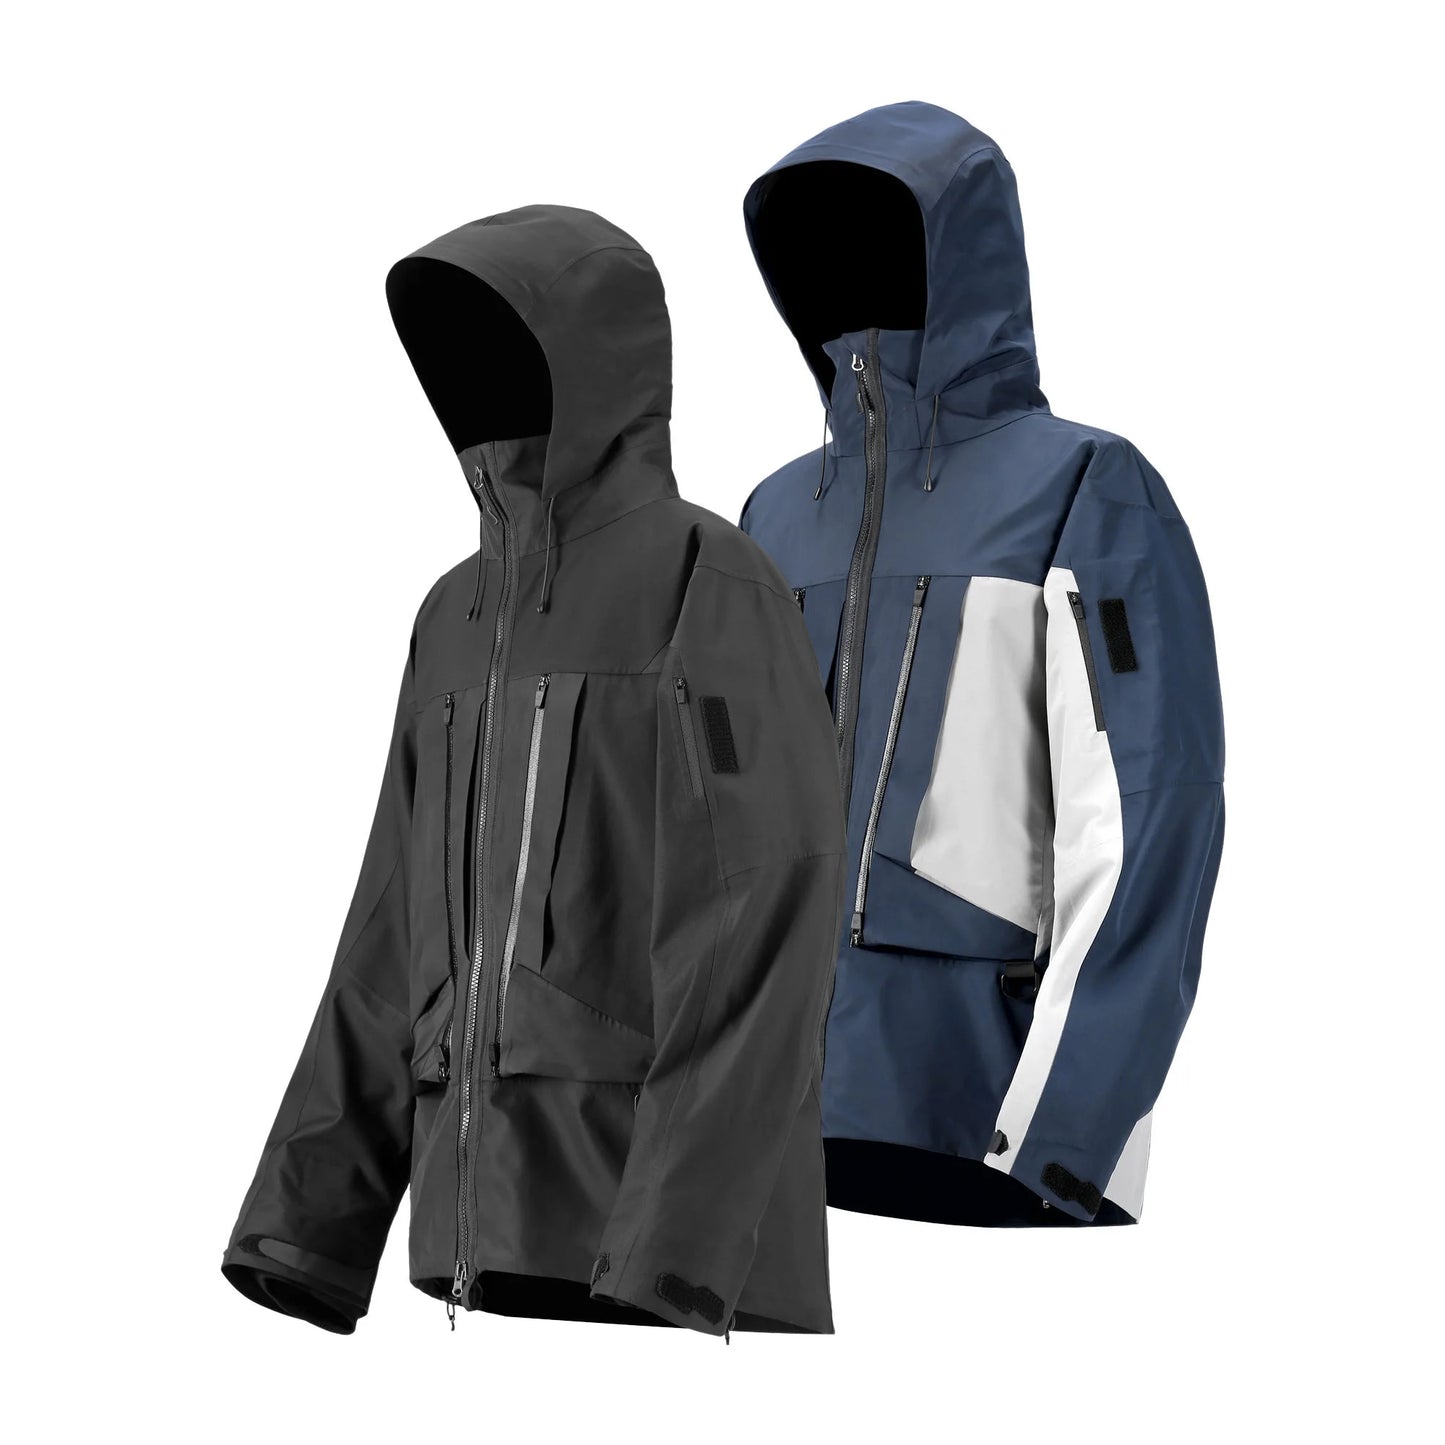 The 0107 Ski Down Techwear Jacket in two colors, Blue and Black